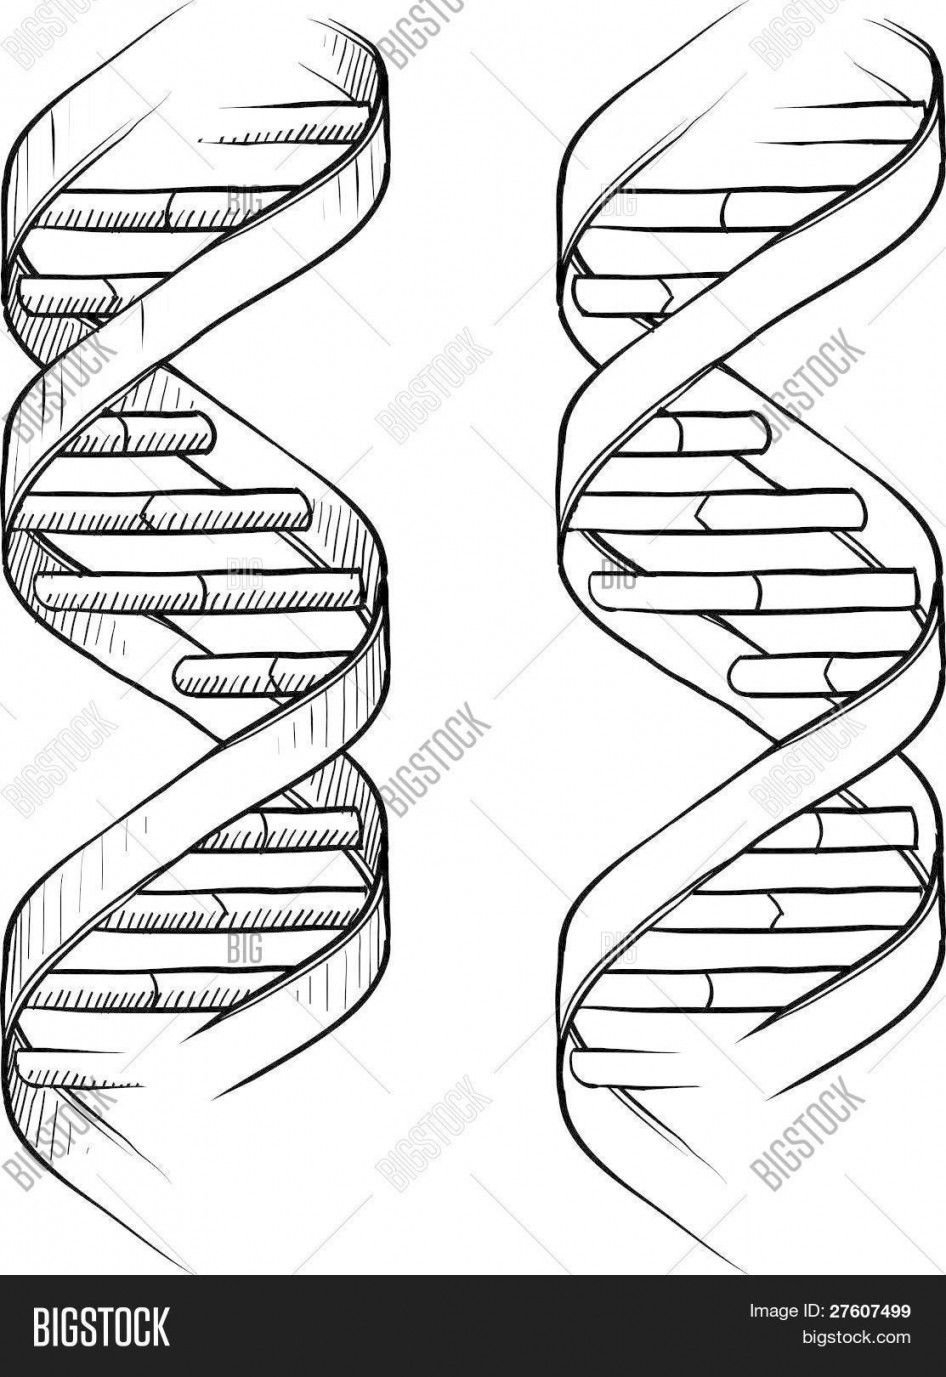 Dna The Double Helix Coloring Worksheet Answers  Briefencounters Along With Dna The Double Helix Coloring Worksheet